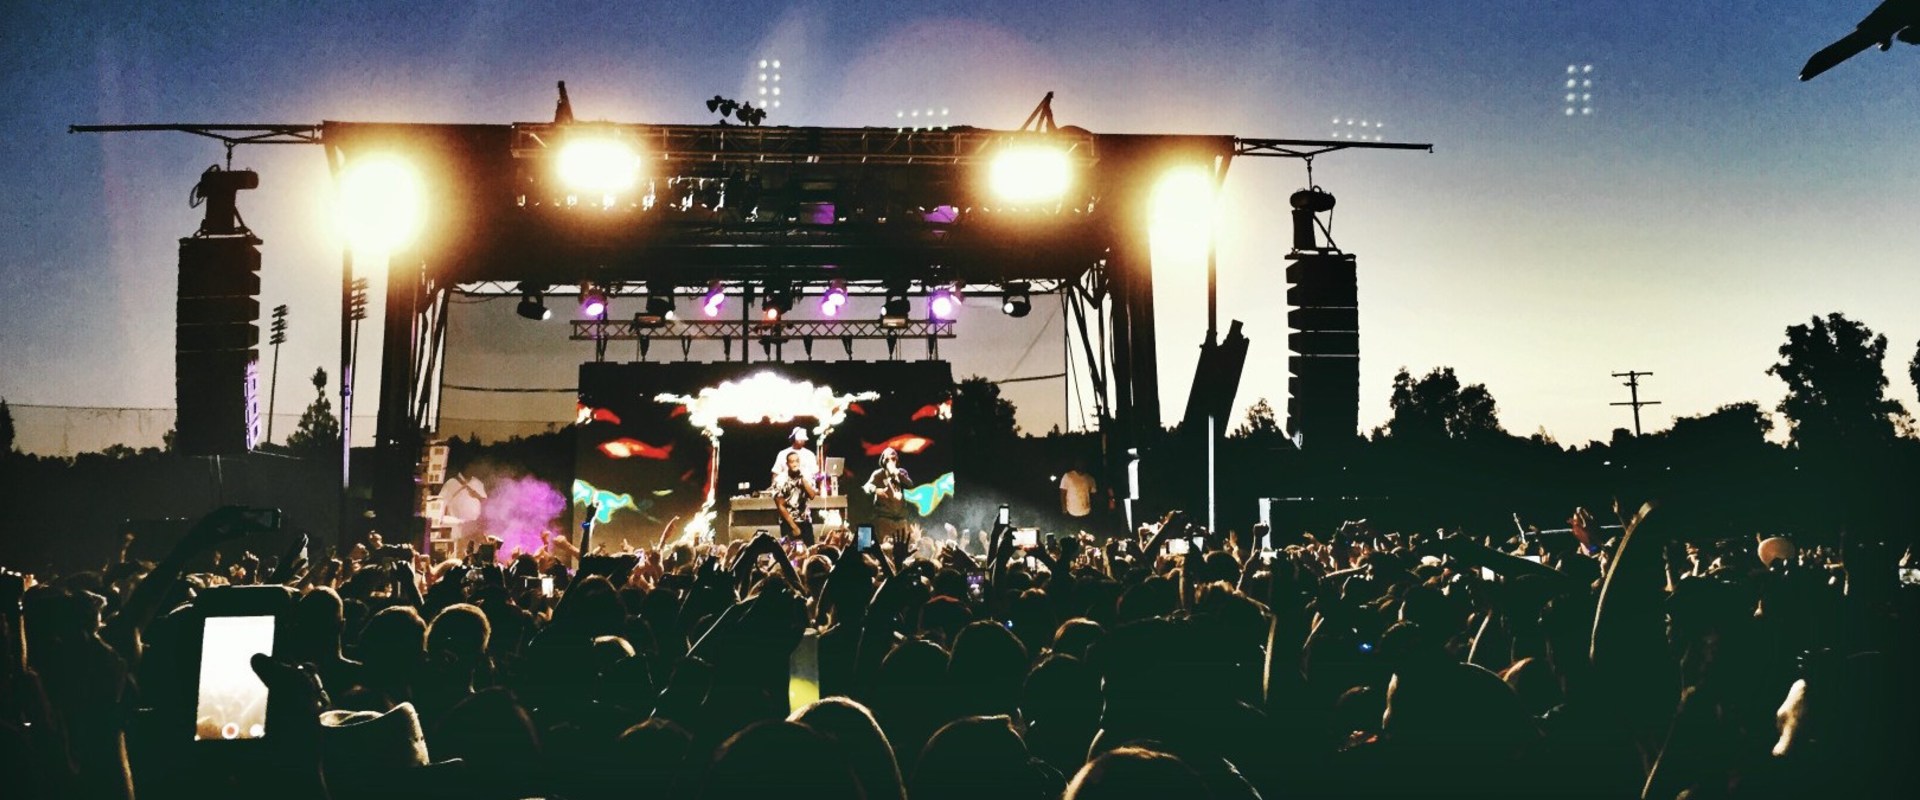 How is a music festival different from a concert?